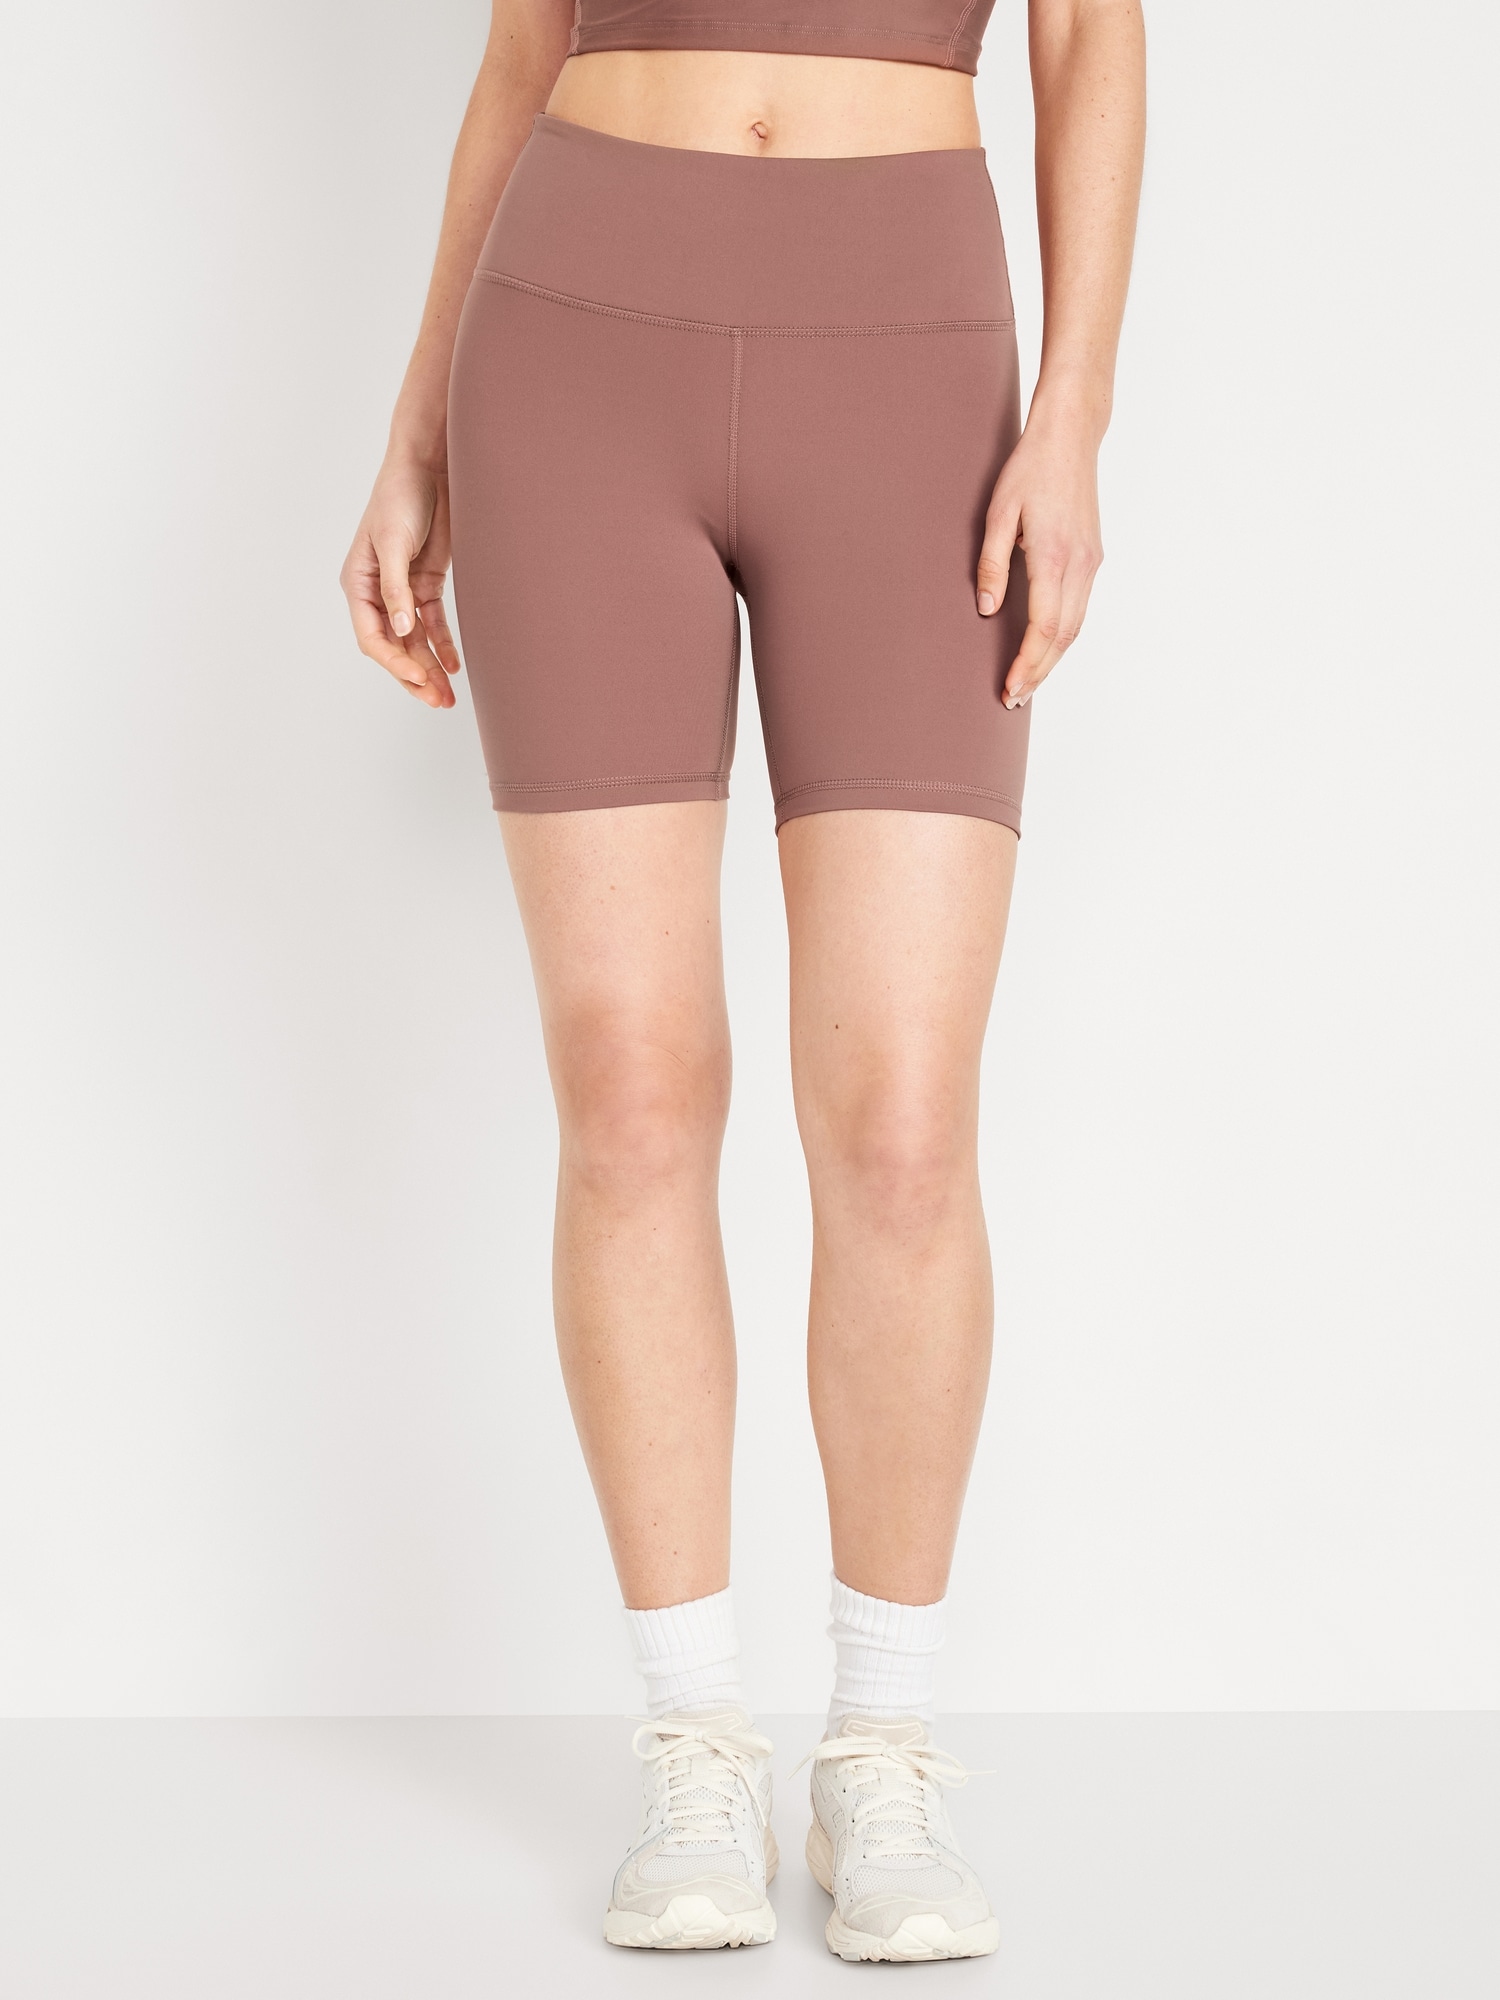 614S, High Waist Compression Shorts - Layer Over Stockings